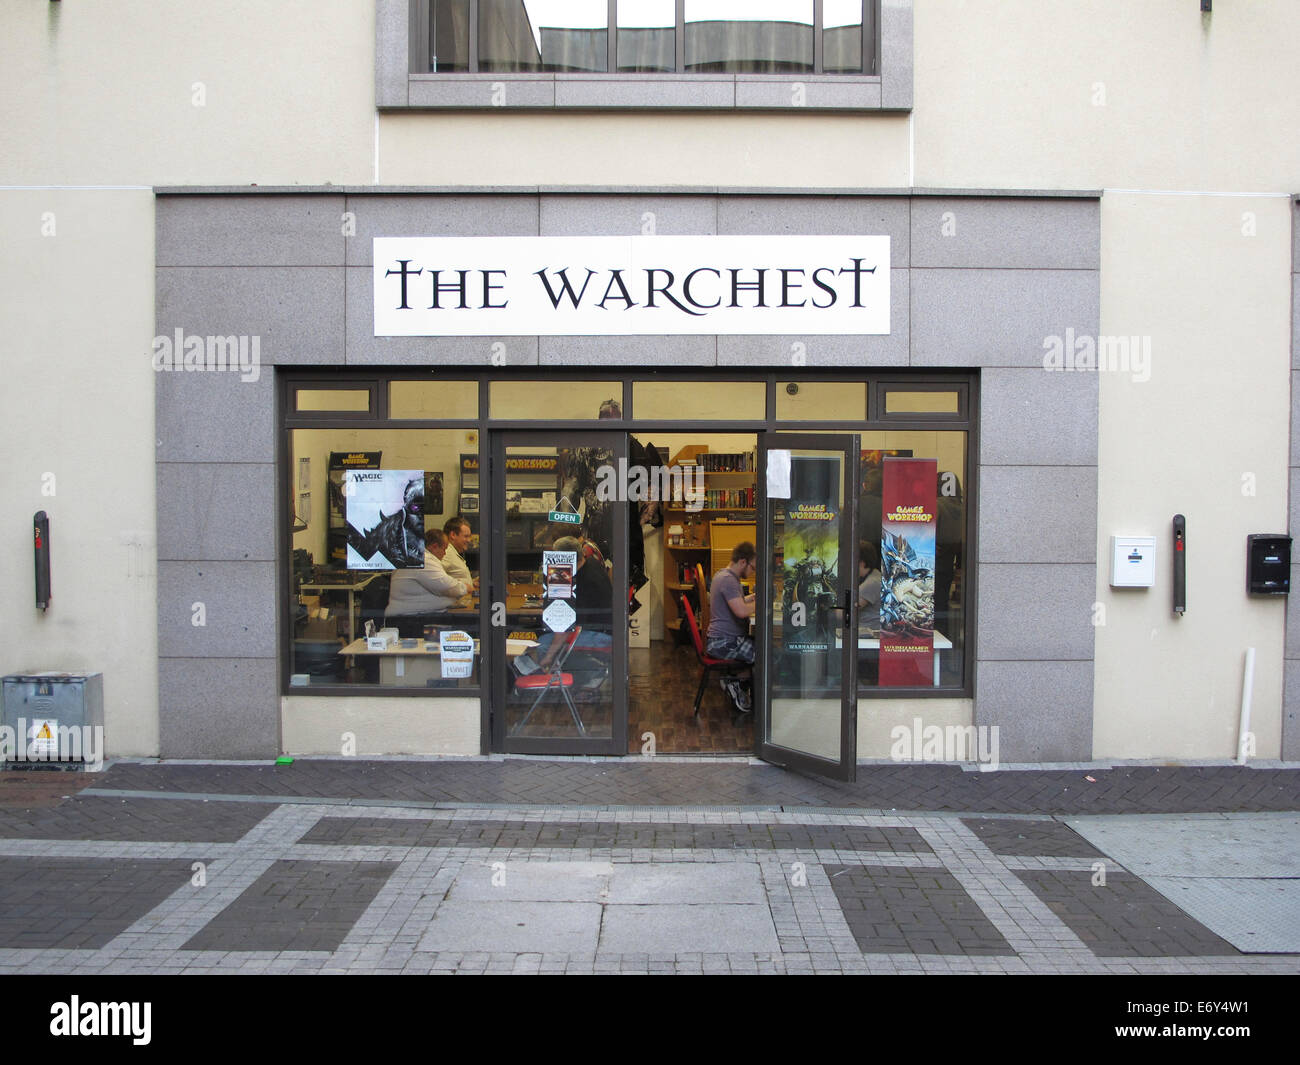 The Warchest Stock Photo